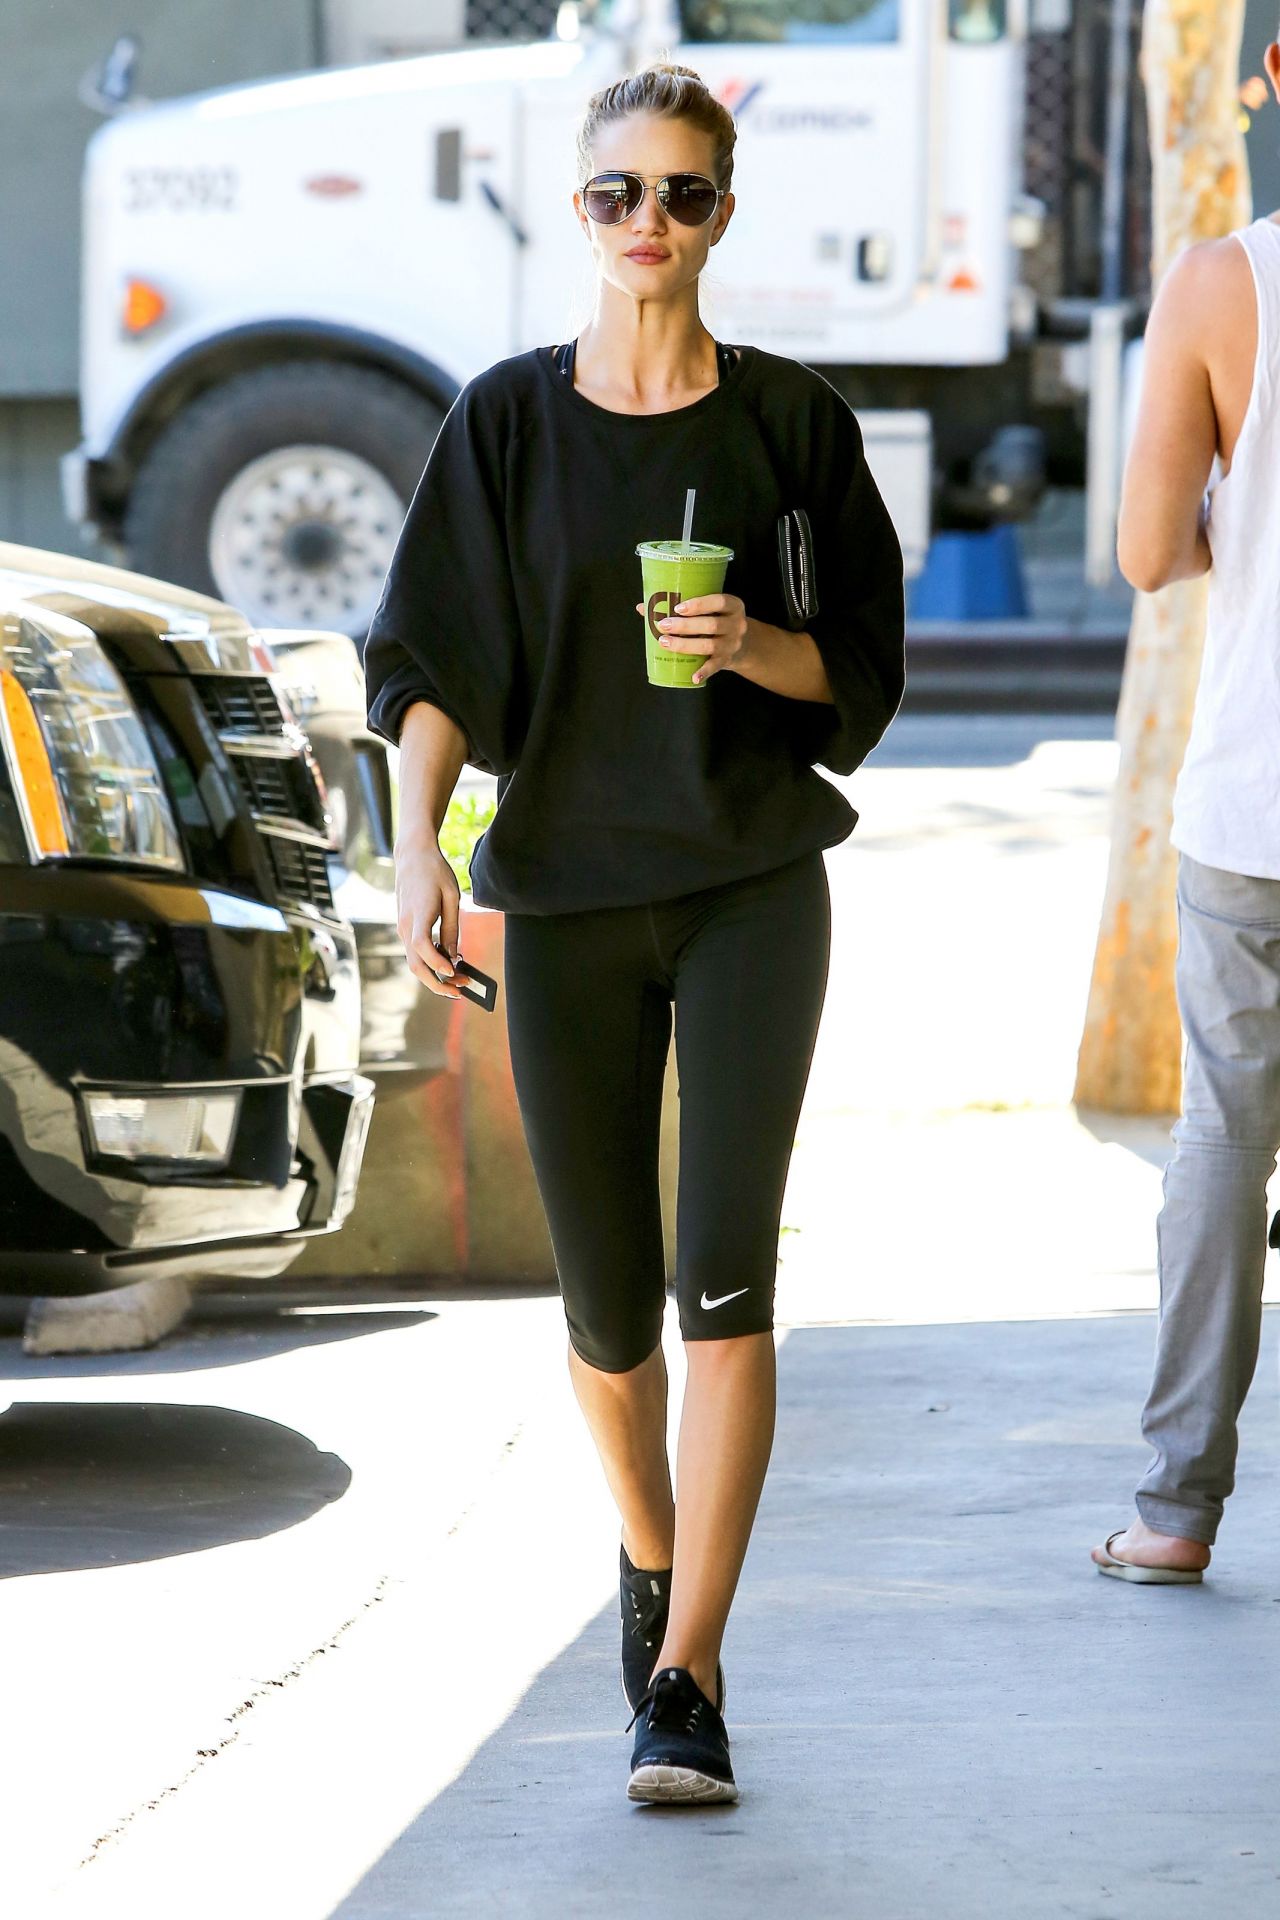 Rosie Huntington-Whiteley Booty in Tights at a Gym in Beverly Hills ...